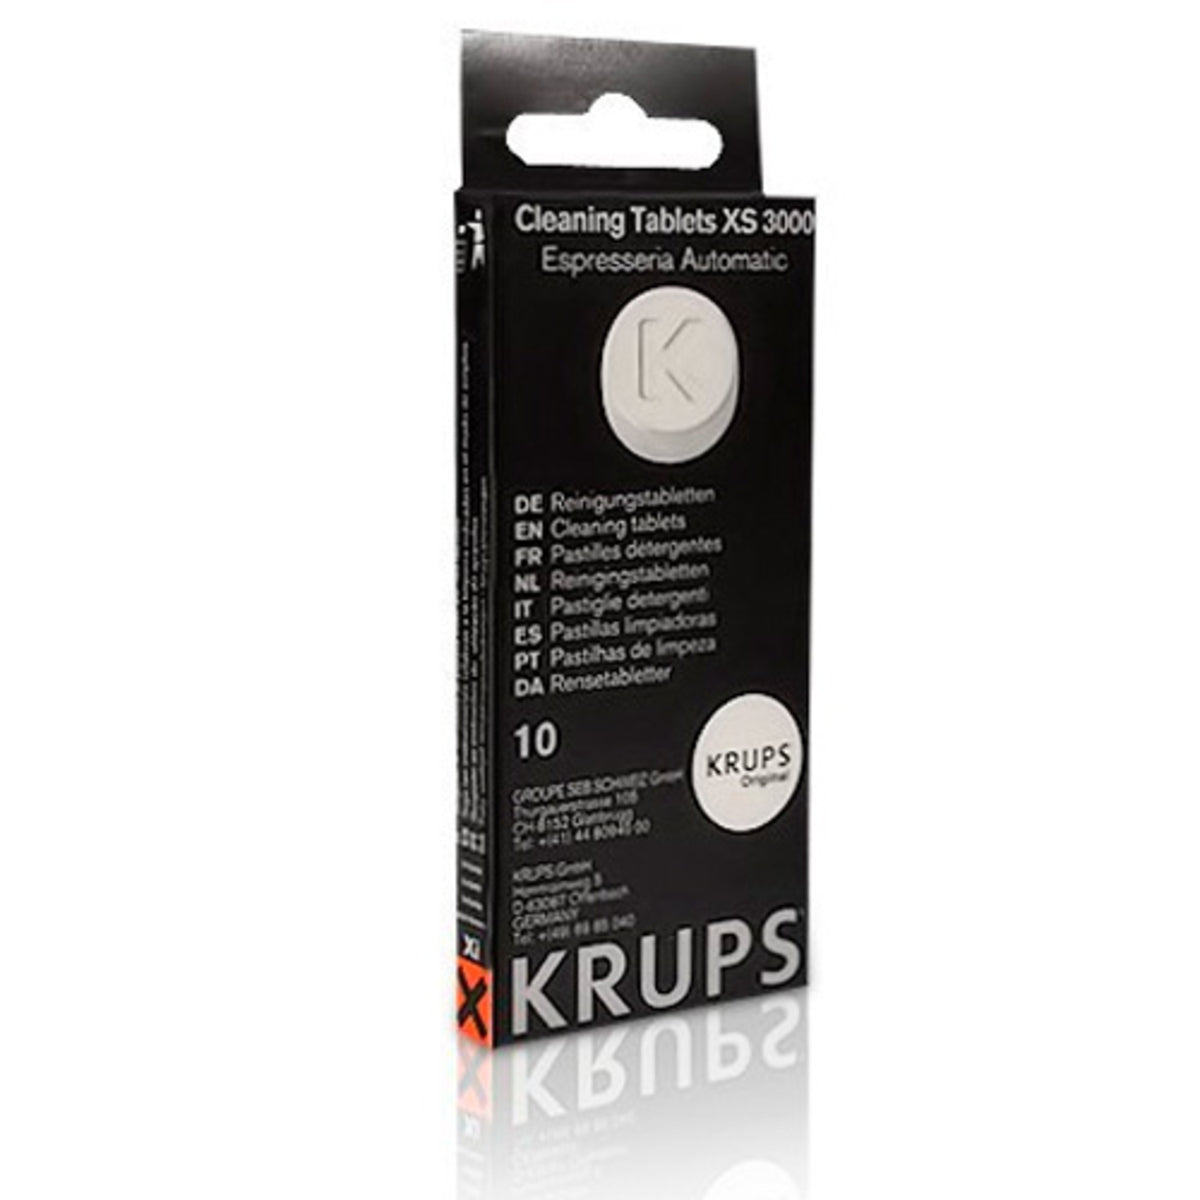 KRUPS XS3000 Cleaning Tablets for KRUPS Fully Automatic Machines For F